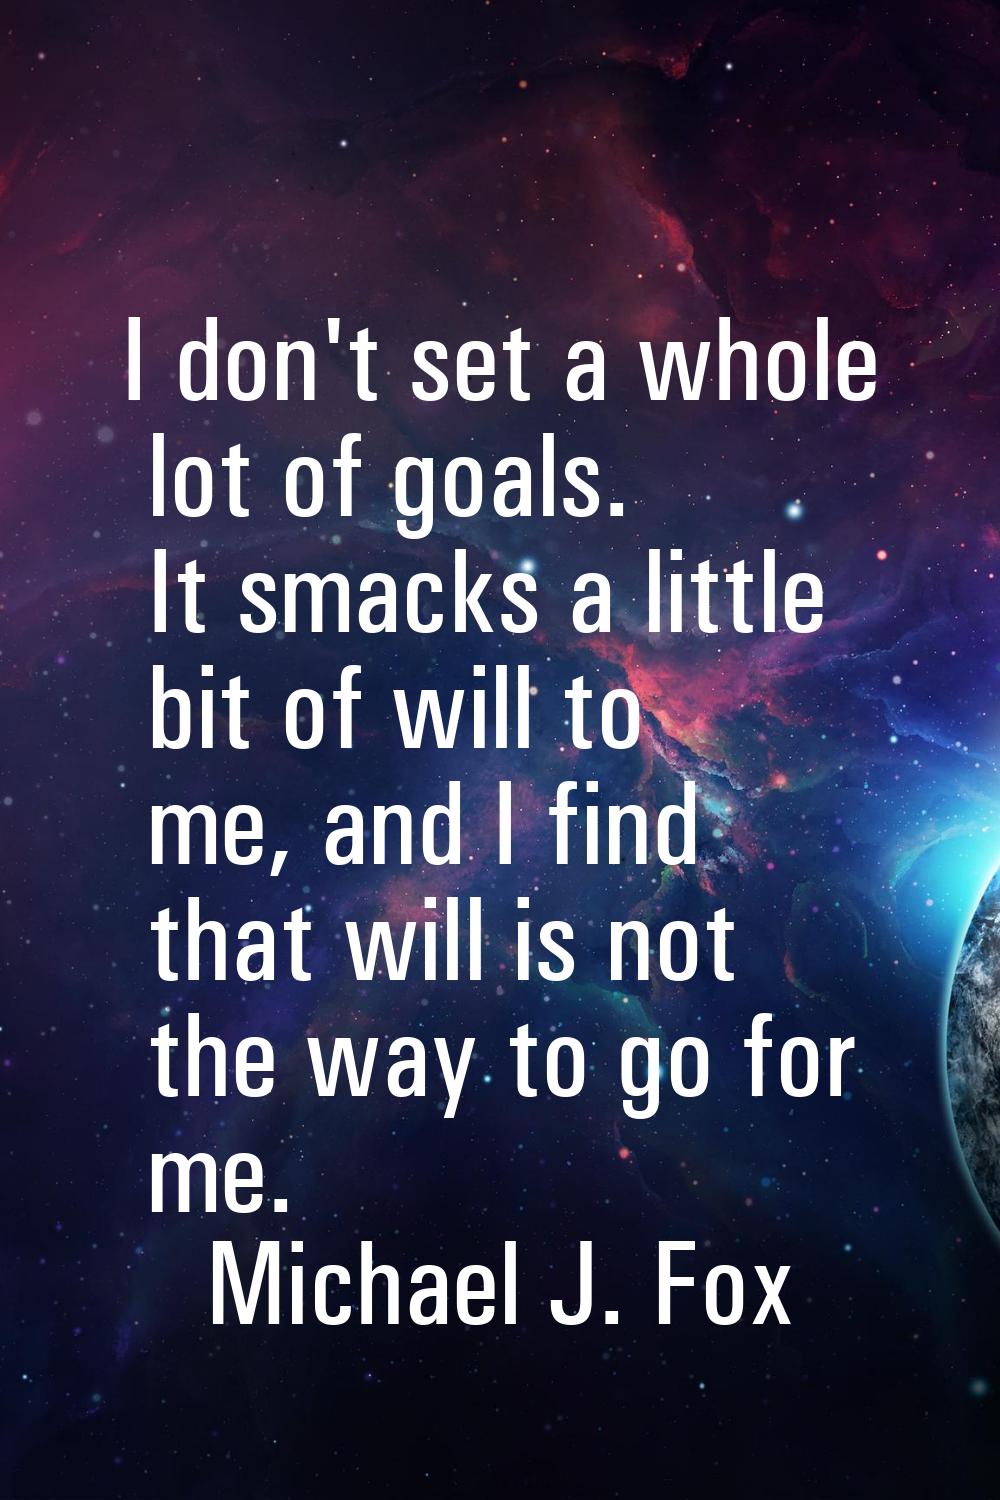 I don't set a whole lot of goals. It smacks a little bit of will to me, and I find that will is not